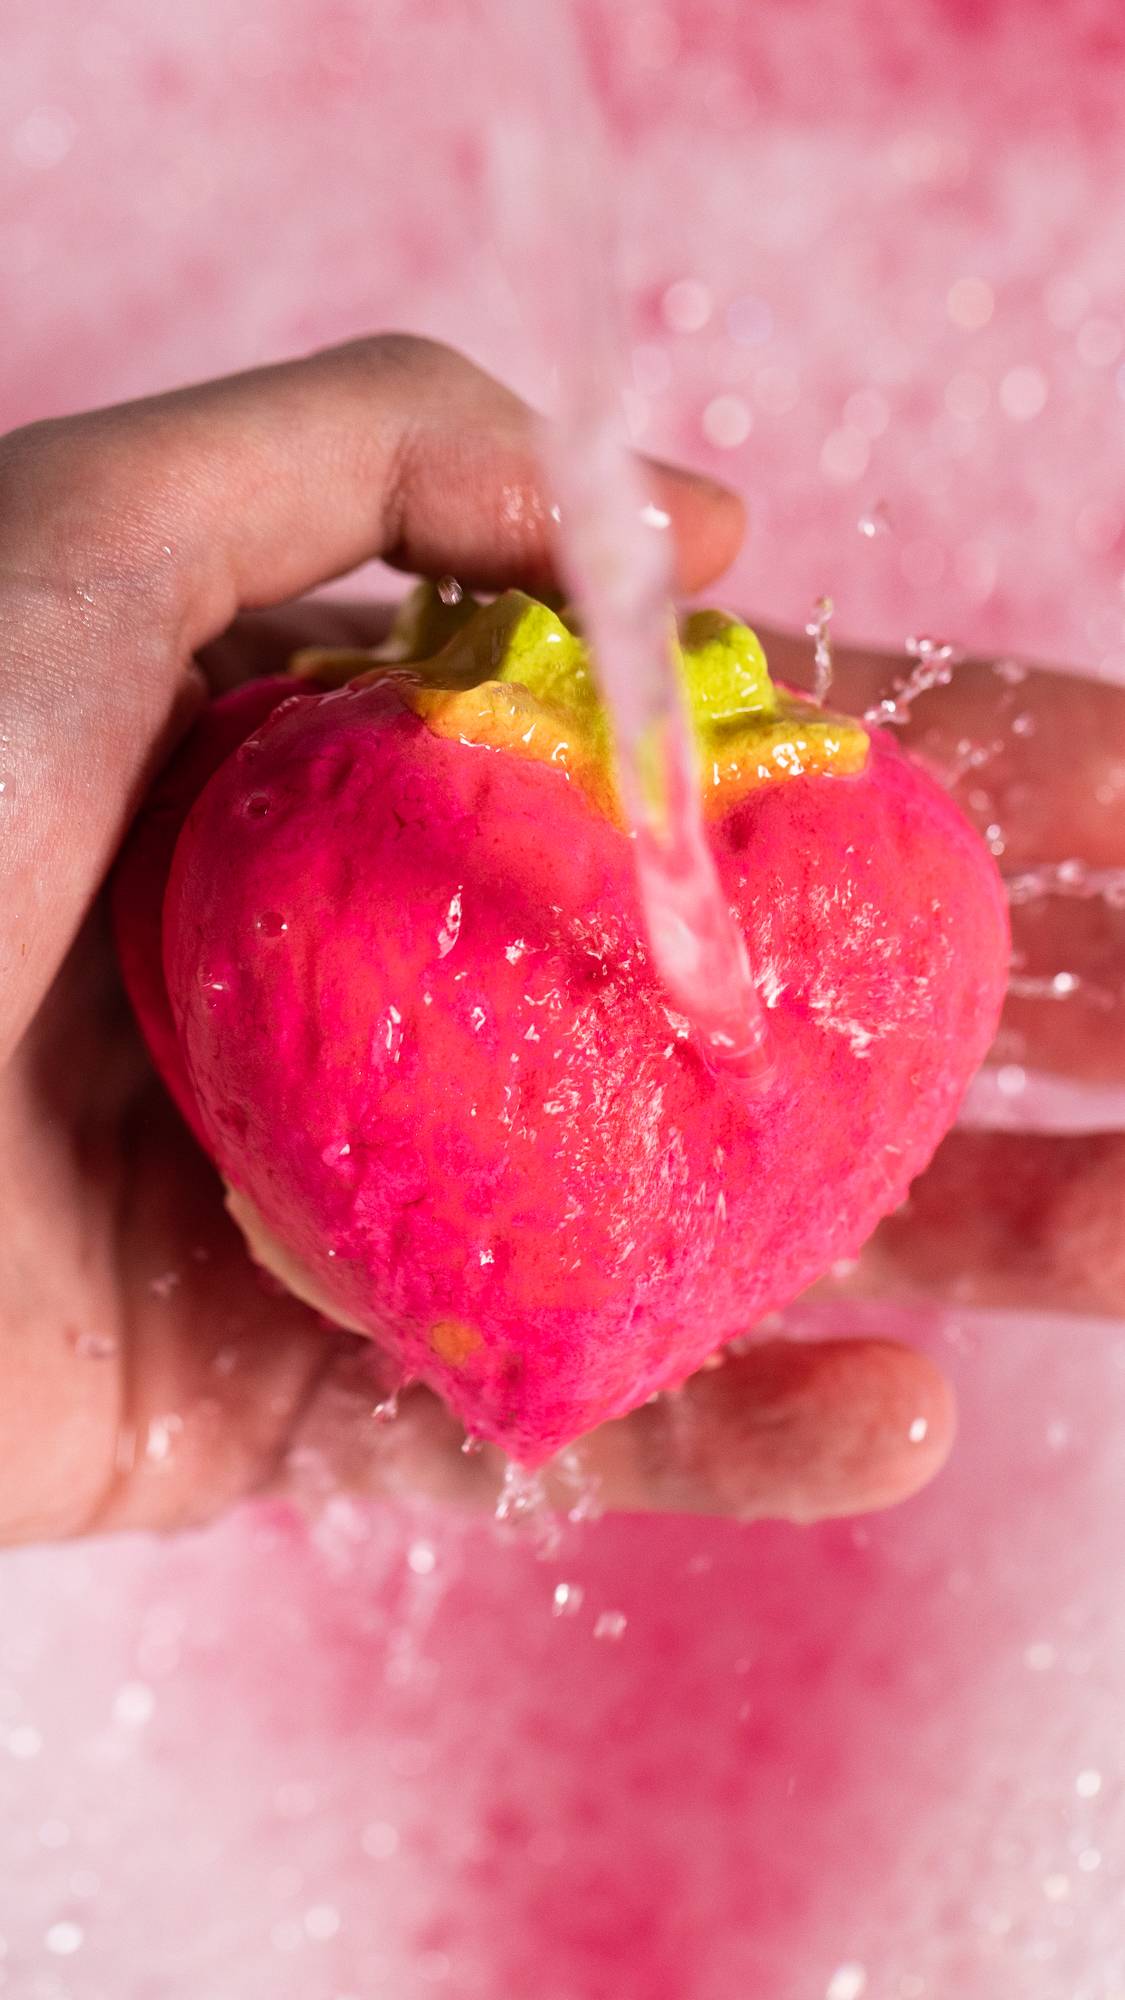 The image shows a close-up of the model holding the Strawberry Crumble bubbleroon under running water creating pink bubbles. 